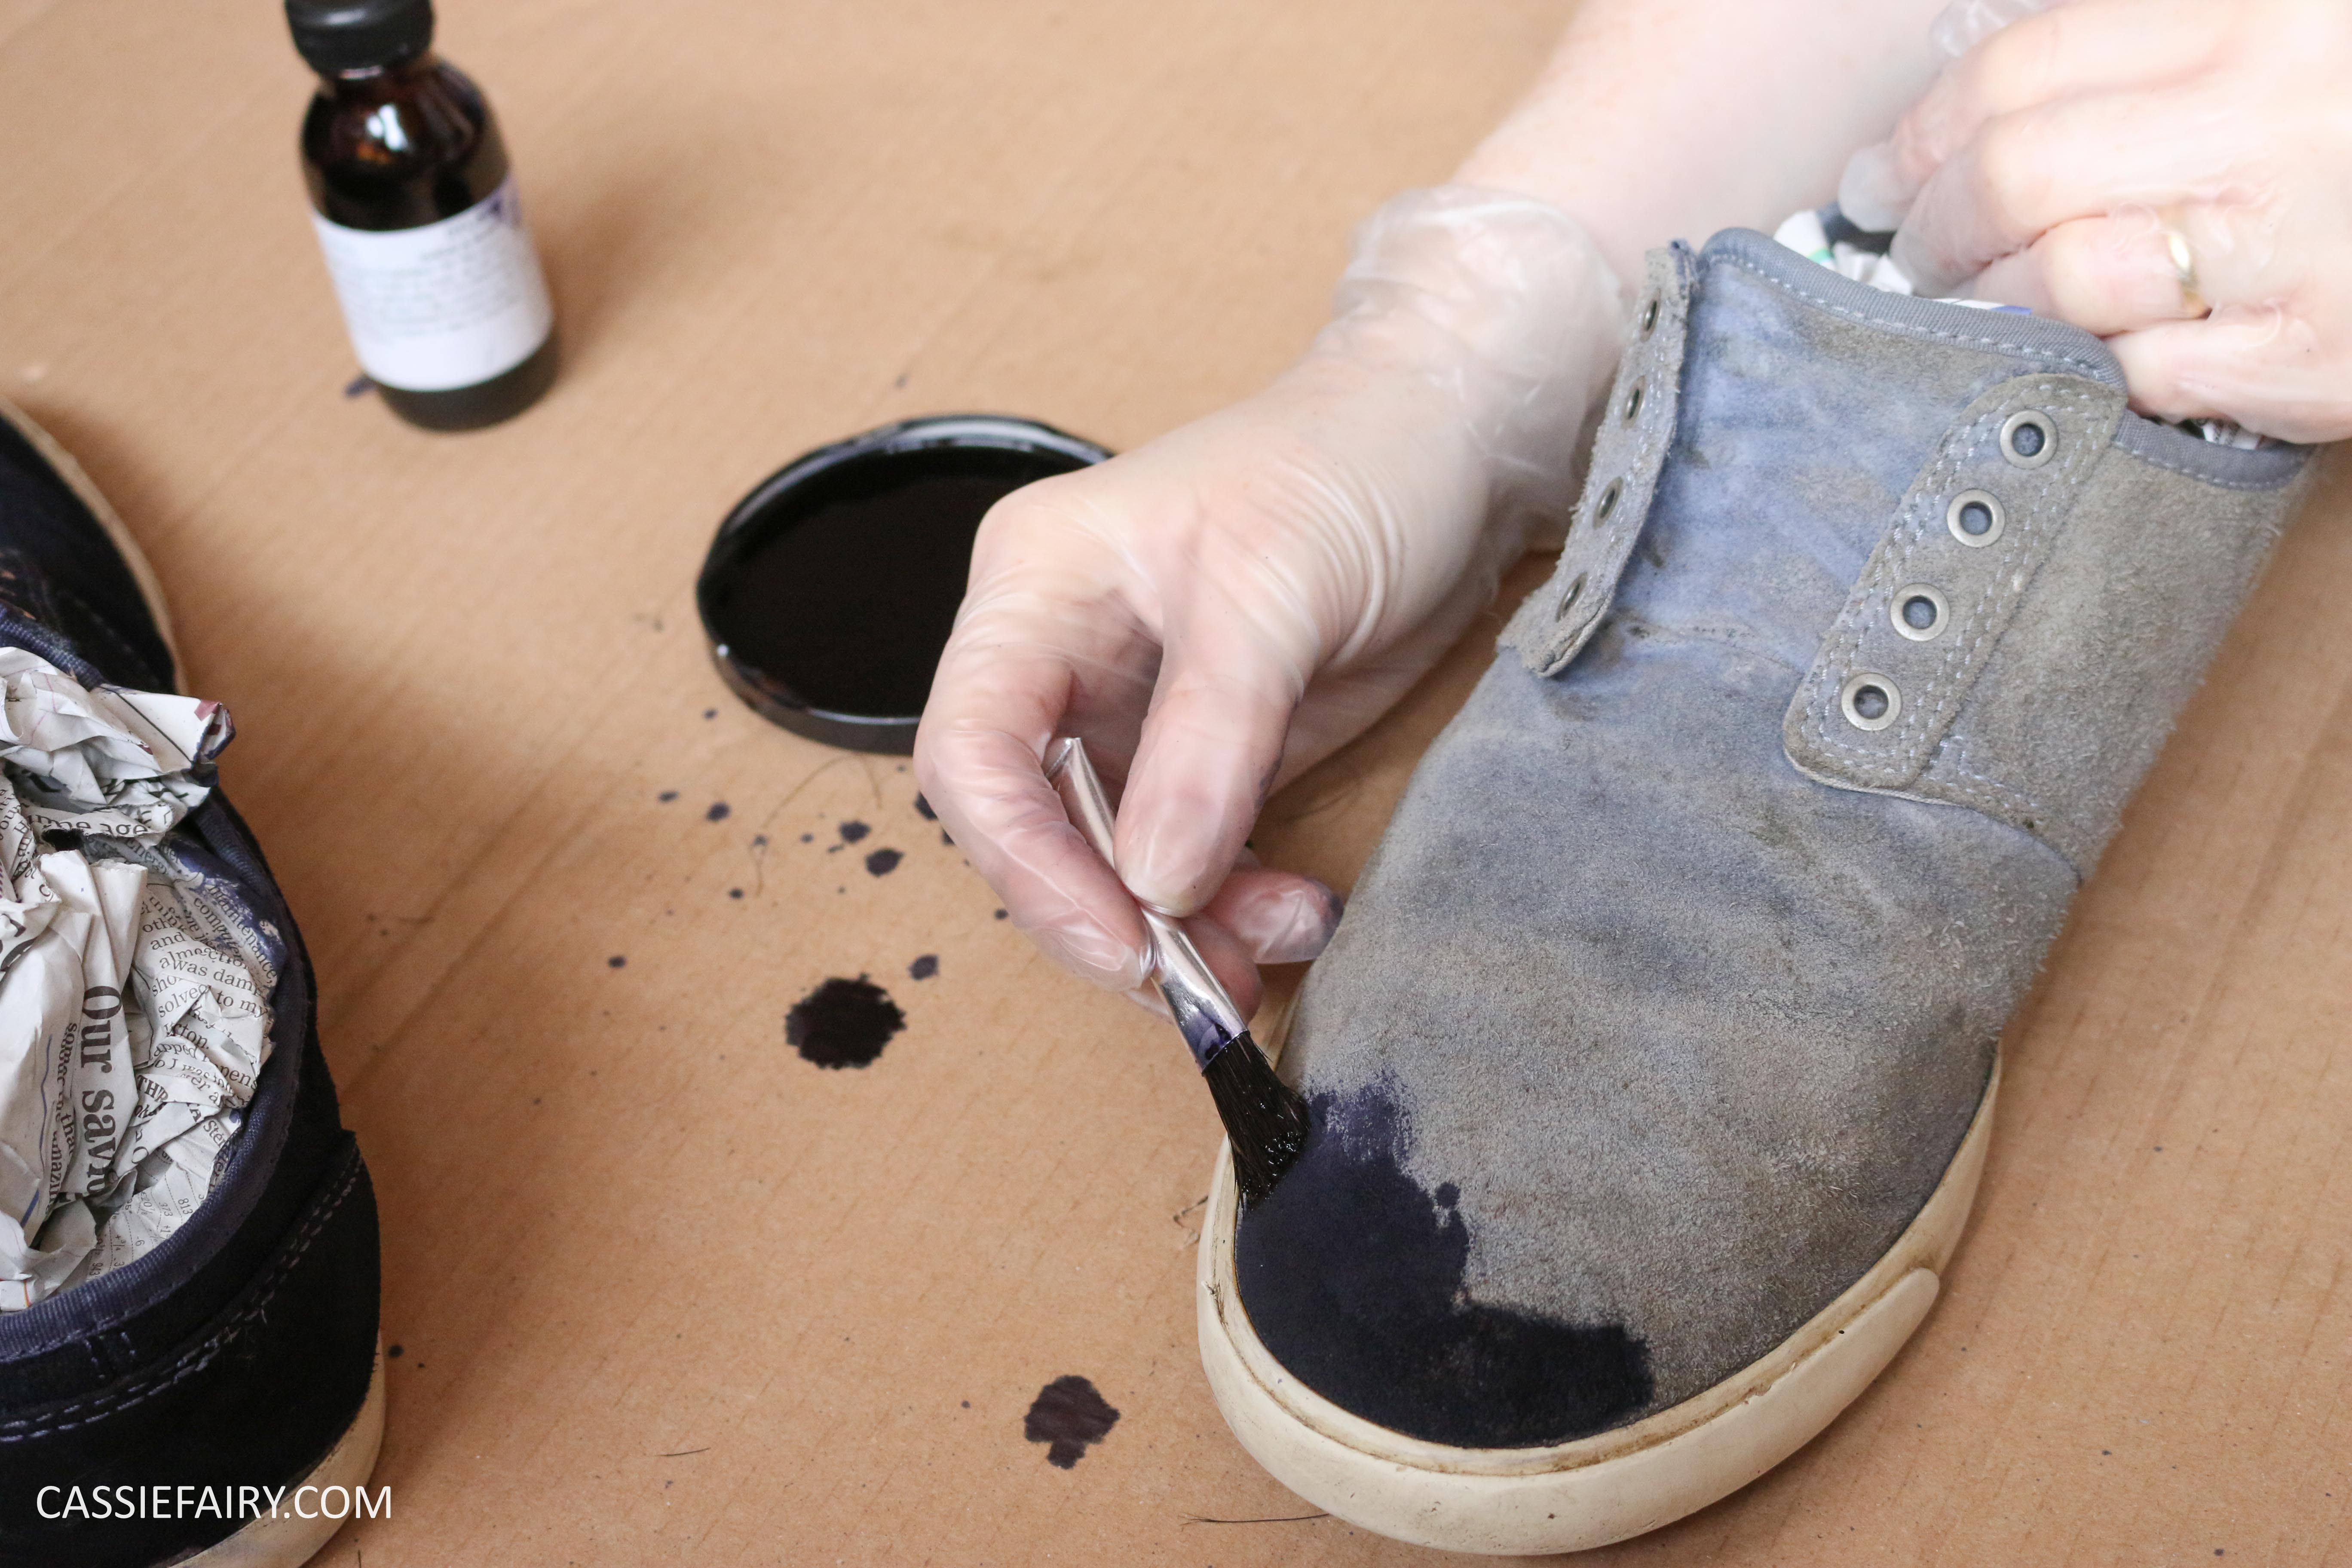 Tuesday Shoesday: How to dye your shoes – step by step video